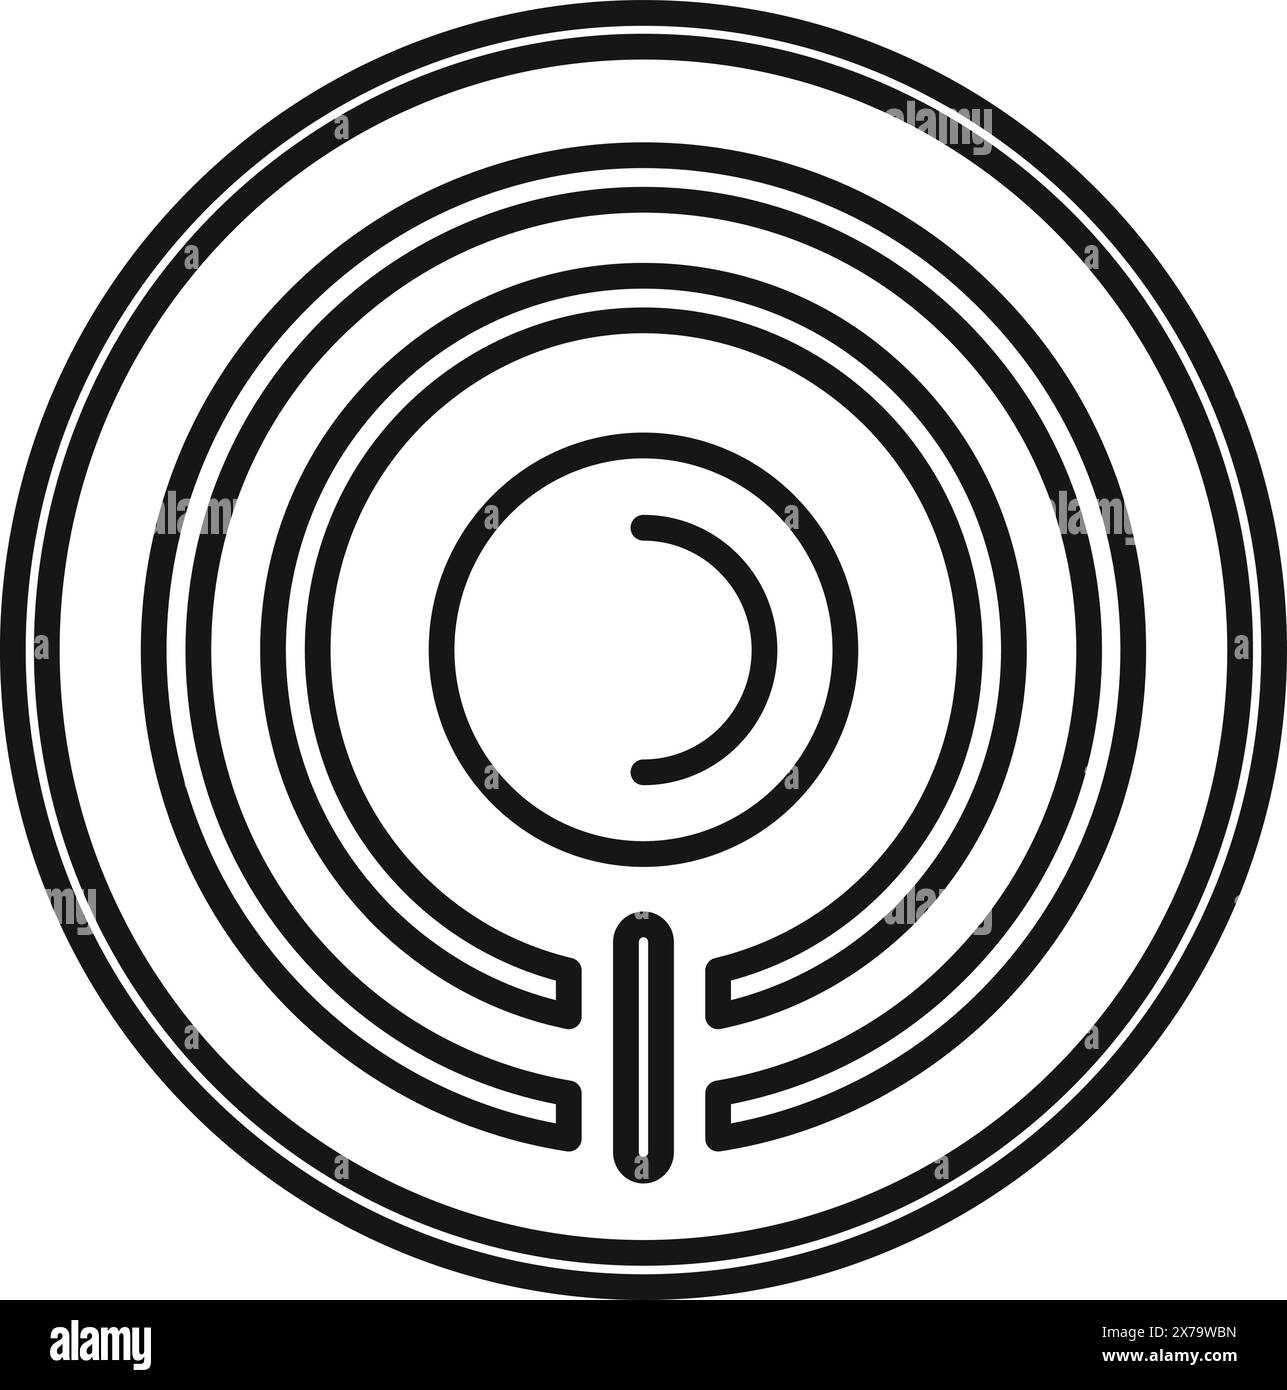 Intricate and detailed abstract circular maze design with black and white concentric paths, offering a complexity challenge and brain teaser for problem solving and decision making Stock Vector